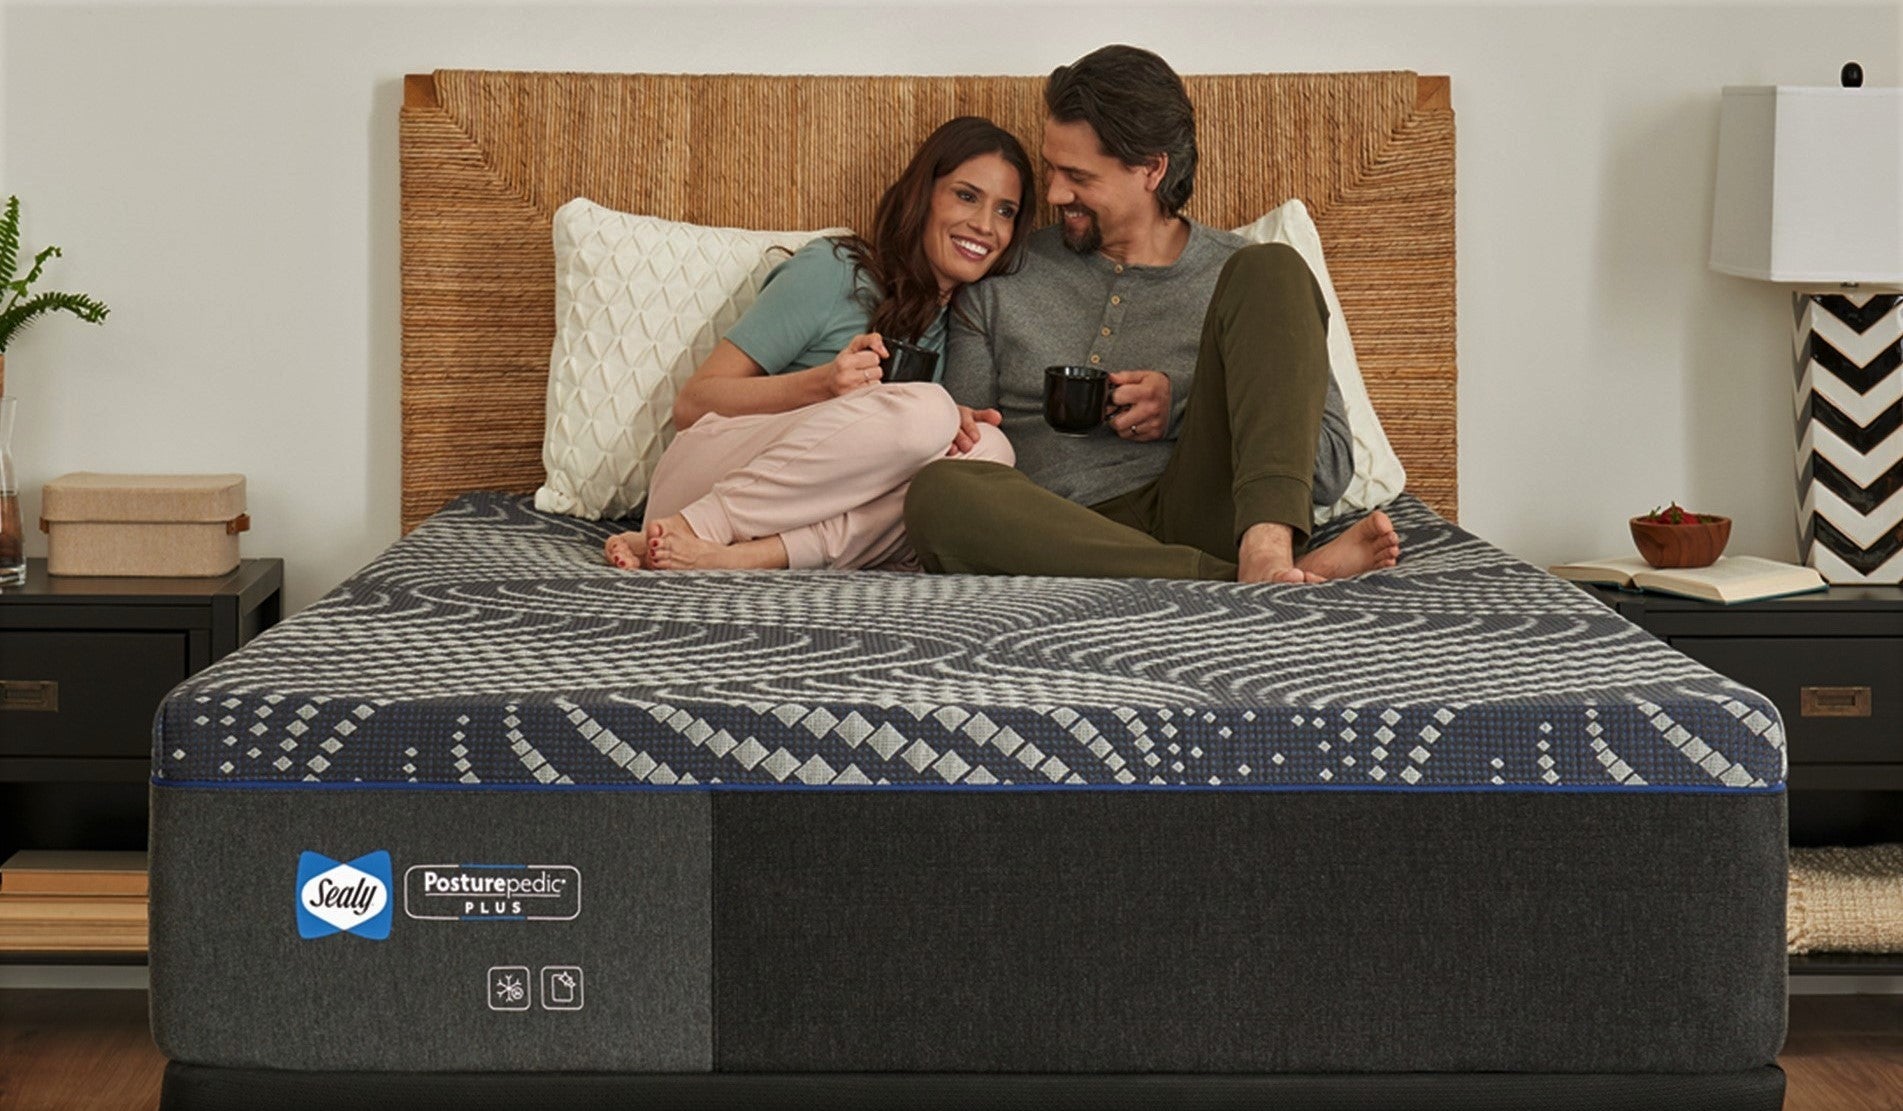 Two people sitting on a Sealy mattress in a bedroom while smiling and holding coffee mugs